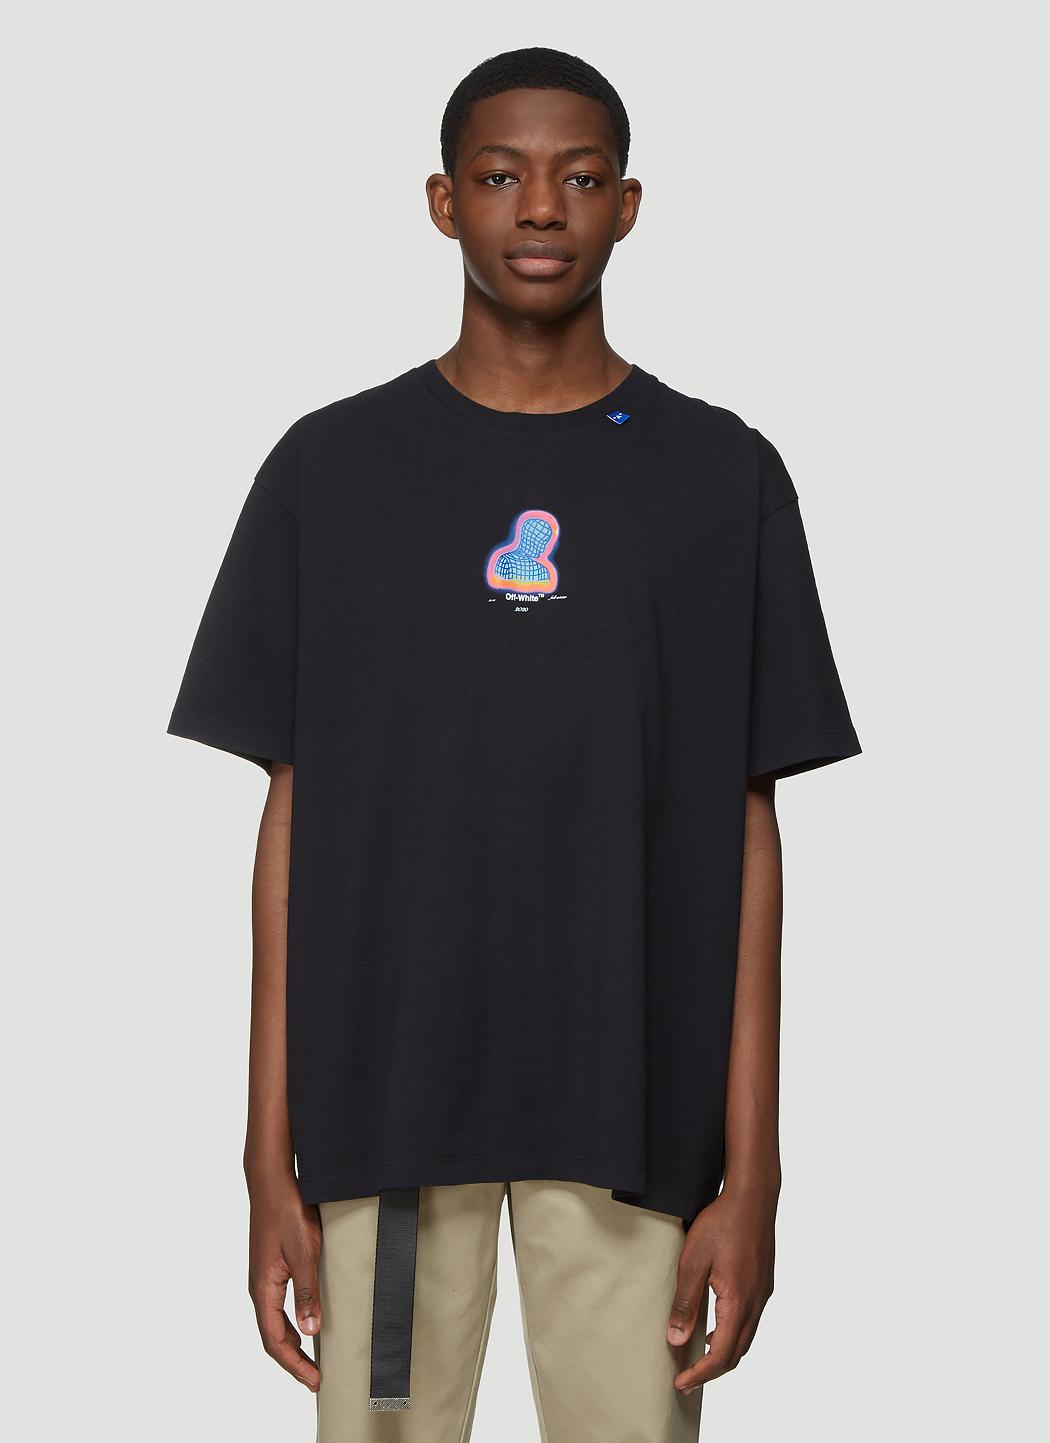 Off-White c/o Virgil Abloh Thermo Man Print T-shirt in Black for Men | Lyst